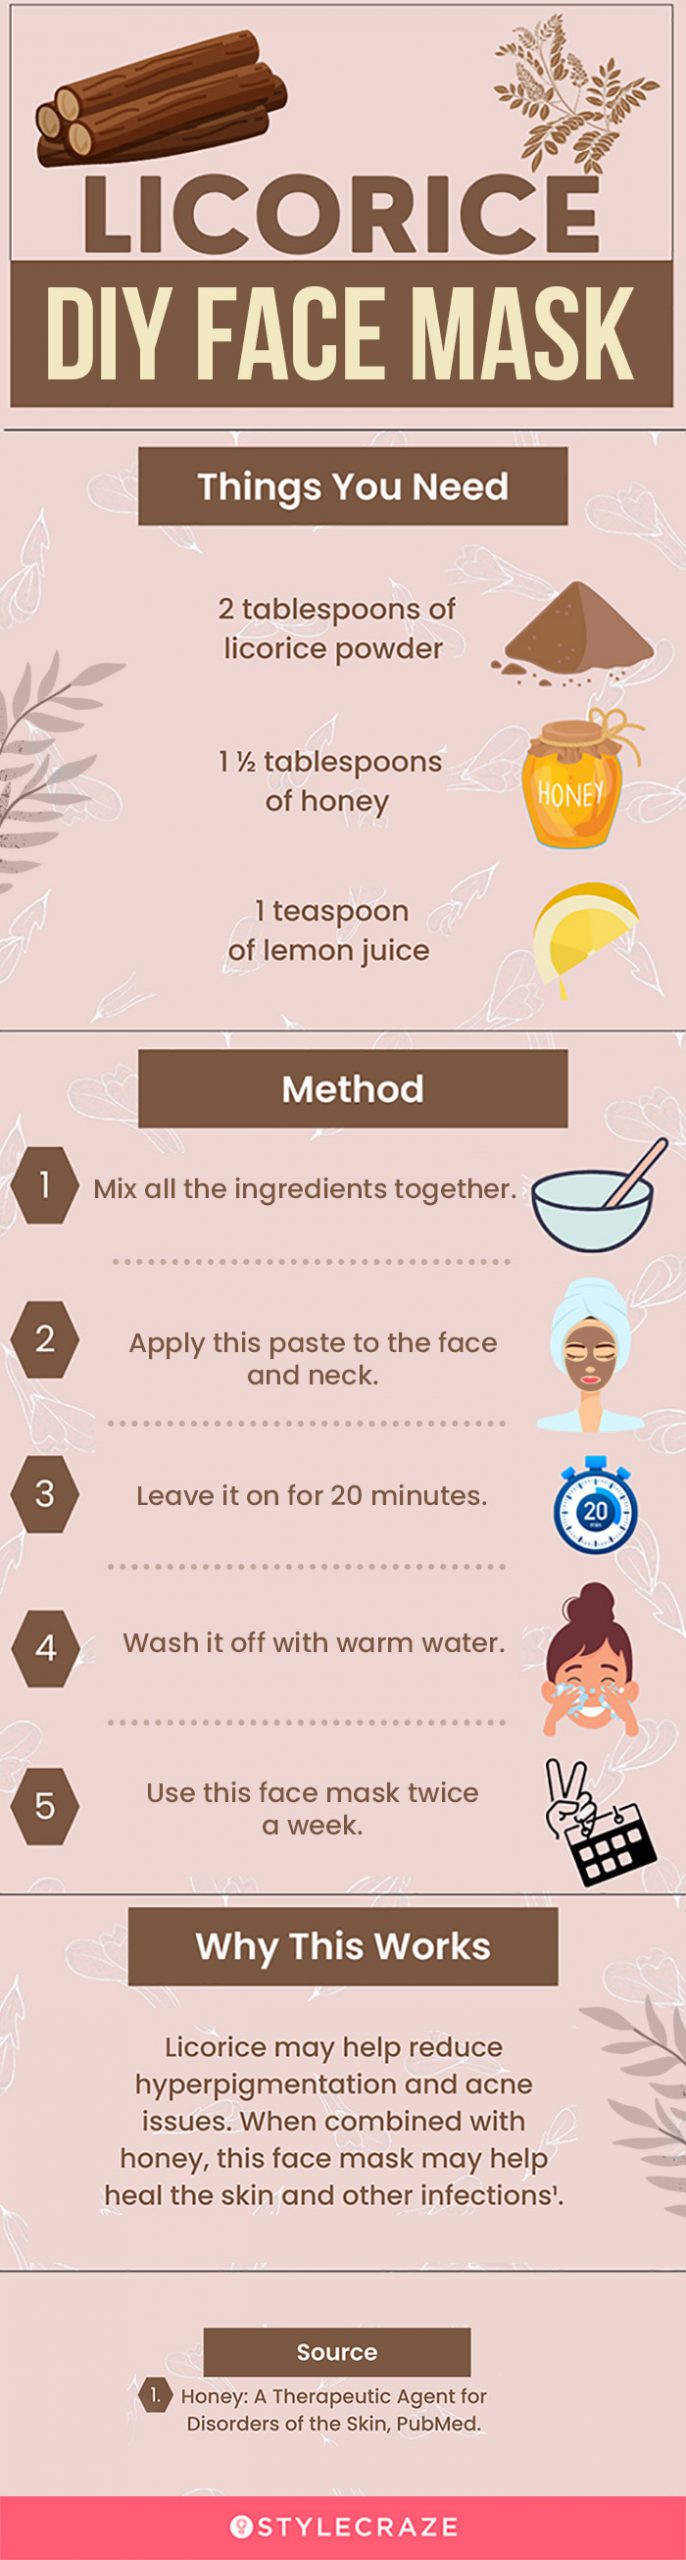 licorice diy face mask [infographic]